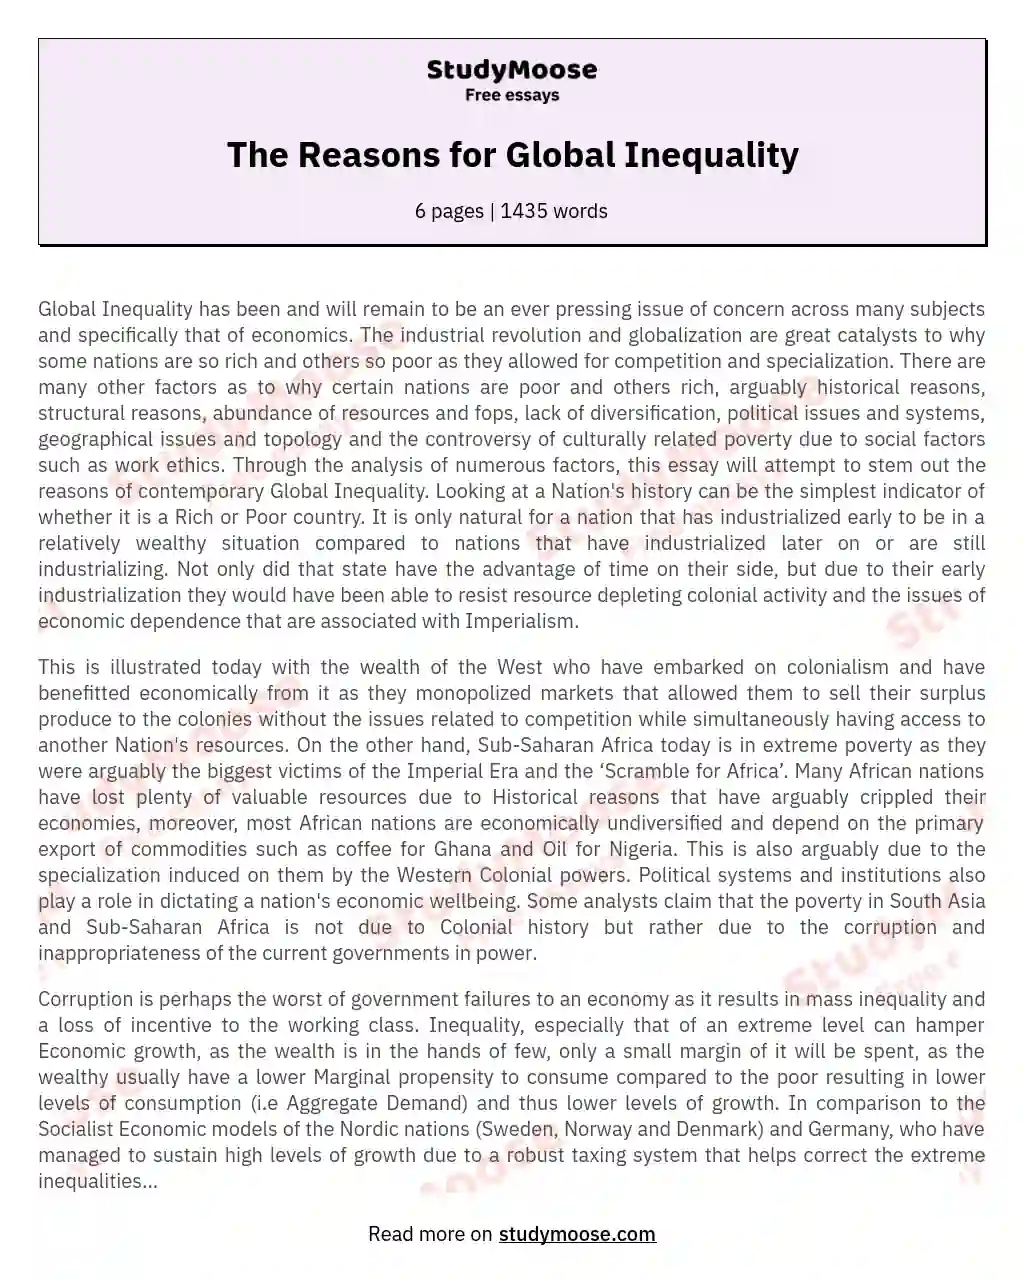 The Reasons for Global Inequality essay